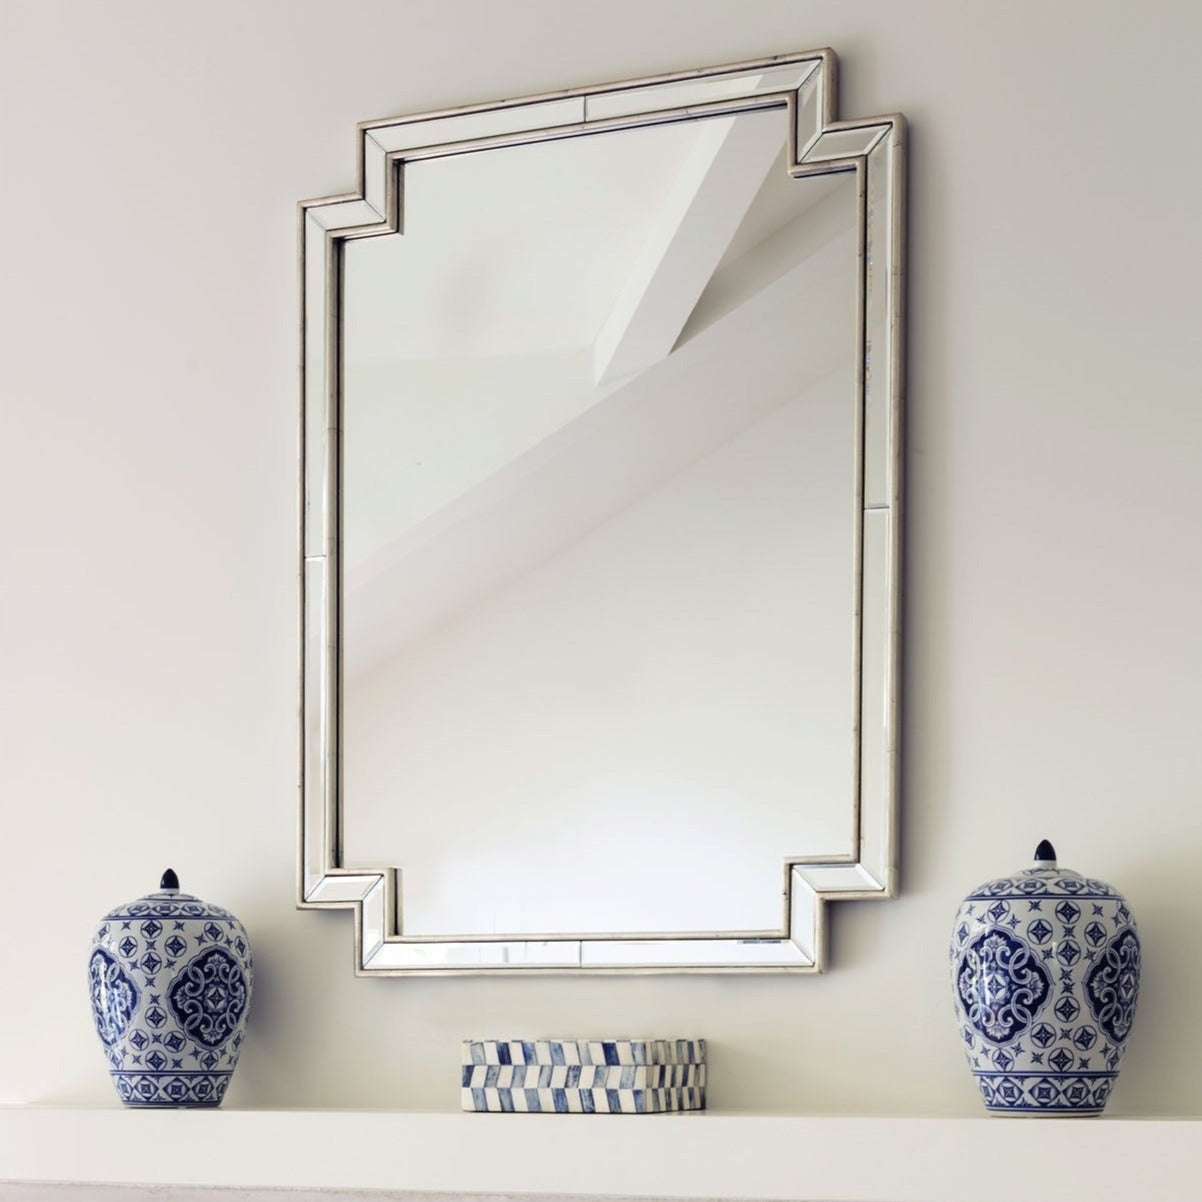 How to Silver Leaf a Mirror Frame » Decor Adventures